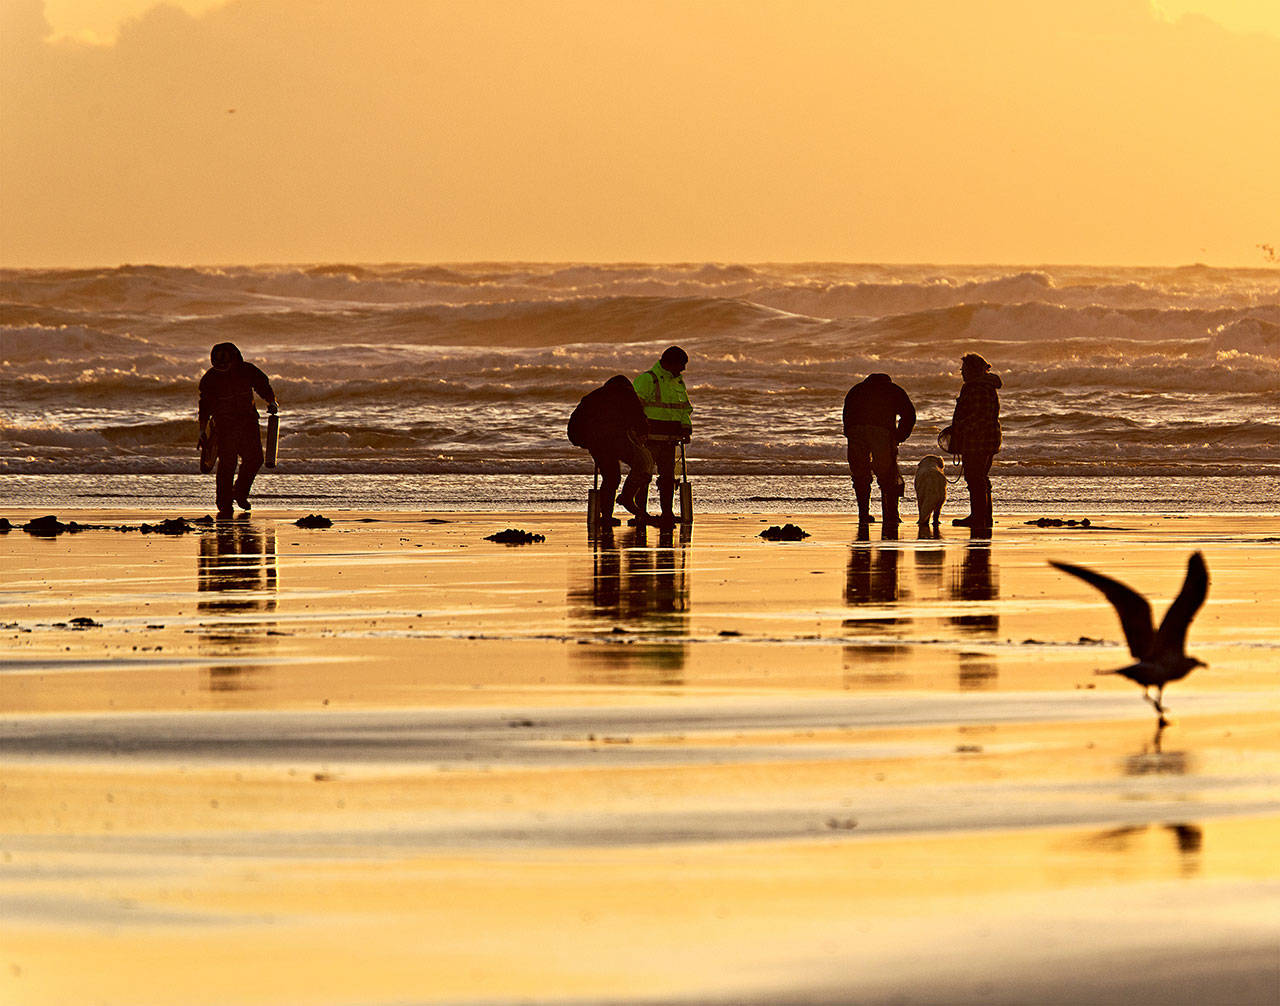 State approves two-day razor clam dig starting March 16